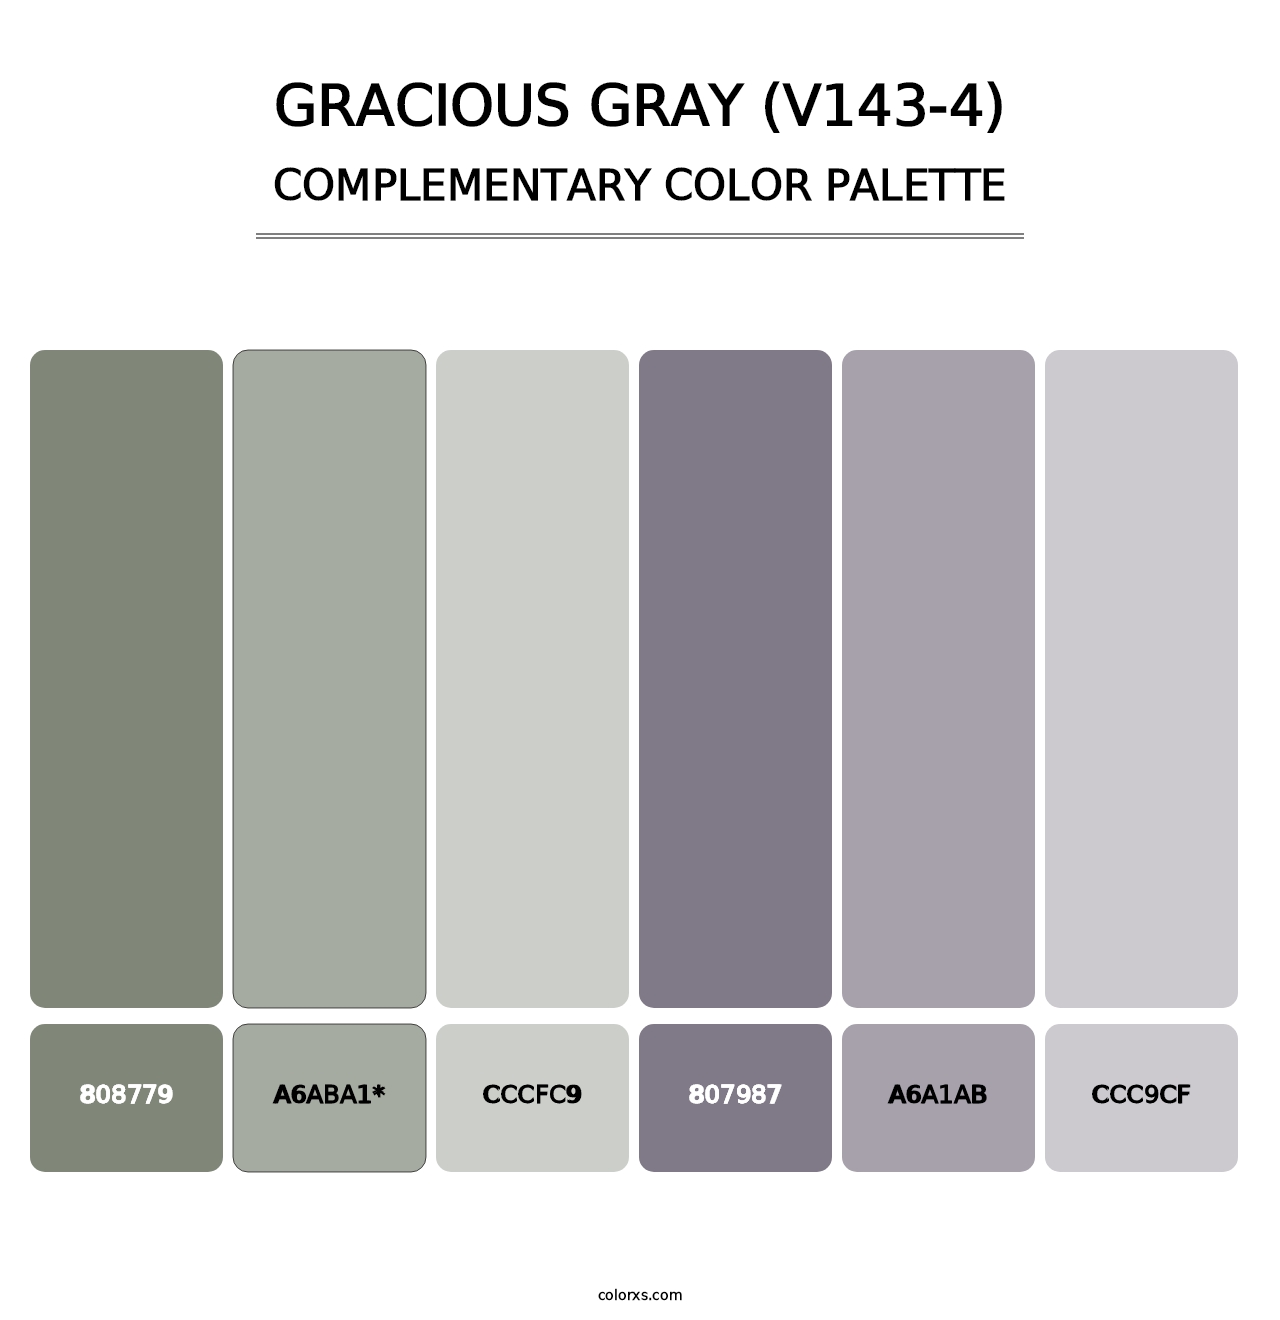 Gracious Gray (V143-4) - Complementary Color Palette